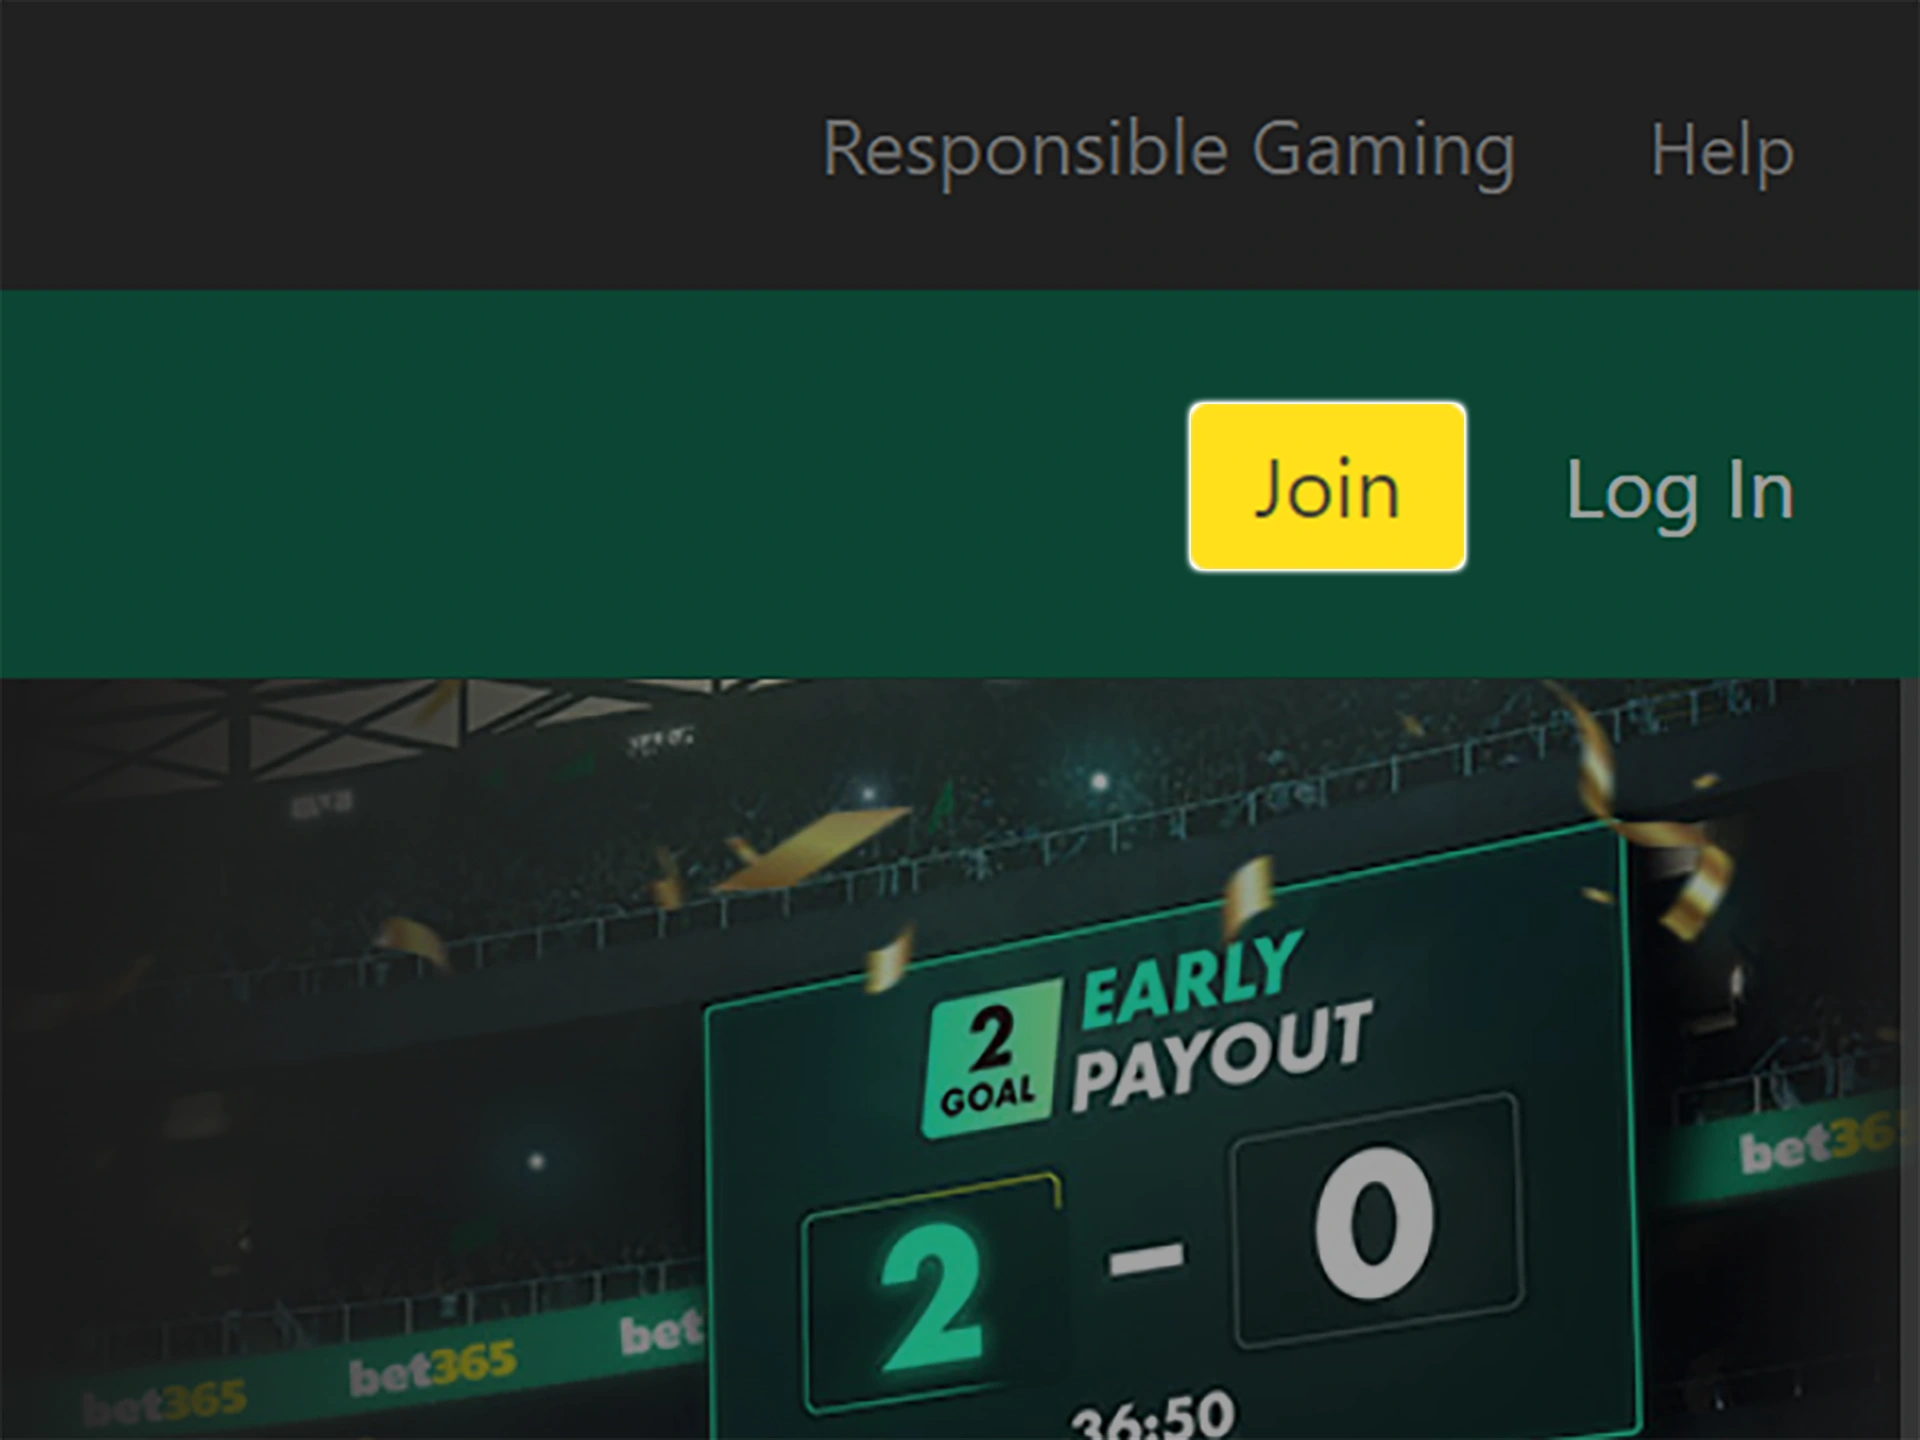 Click the join button to open the Bet365 registration form.